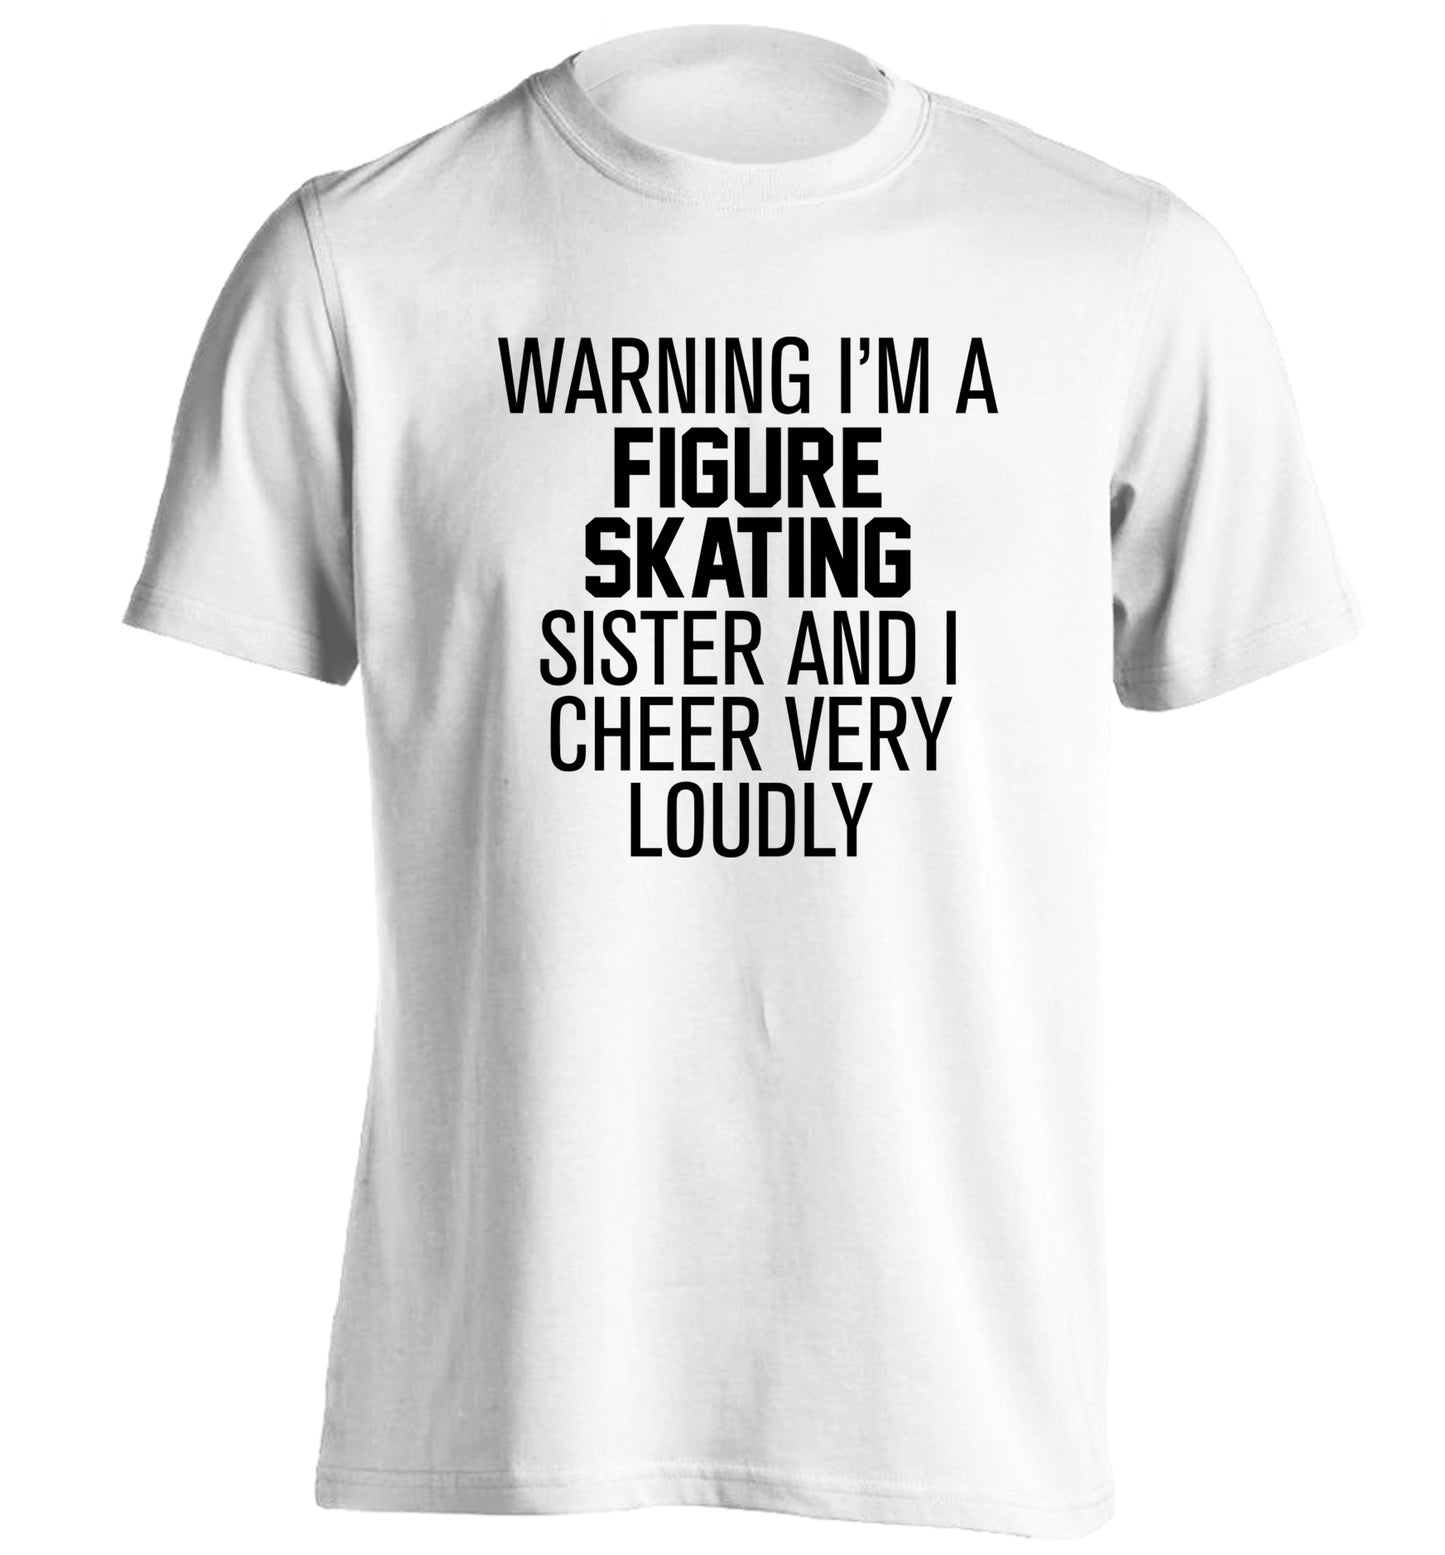 Warning I'm a figure skating sister and I cheer very loudly adults unisexwhite Tshirt 2XL